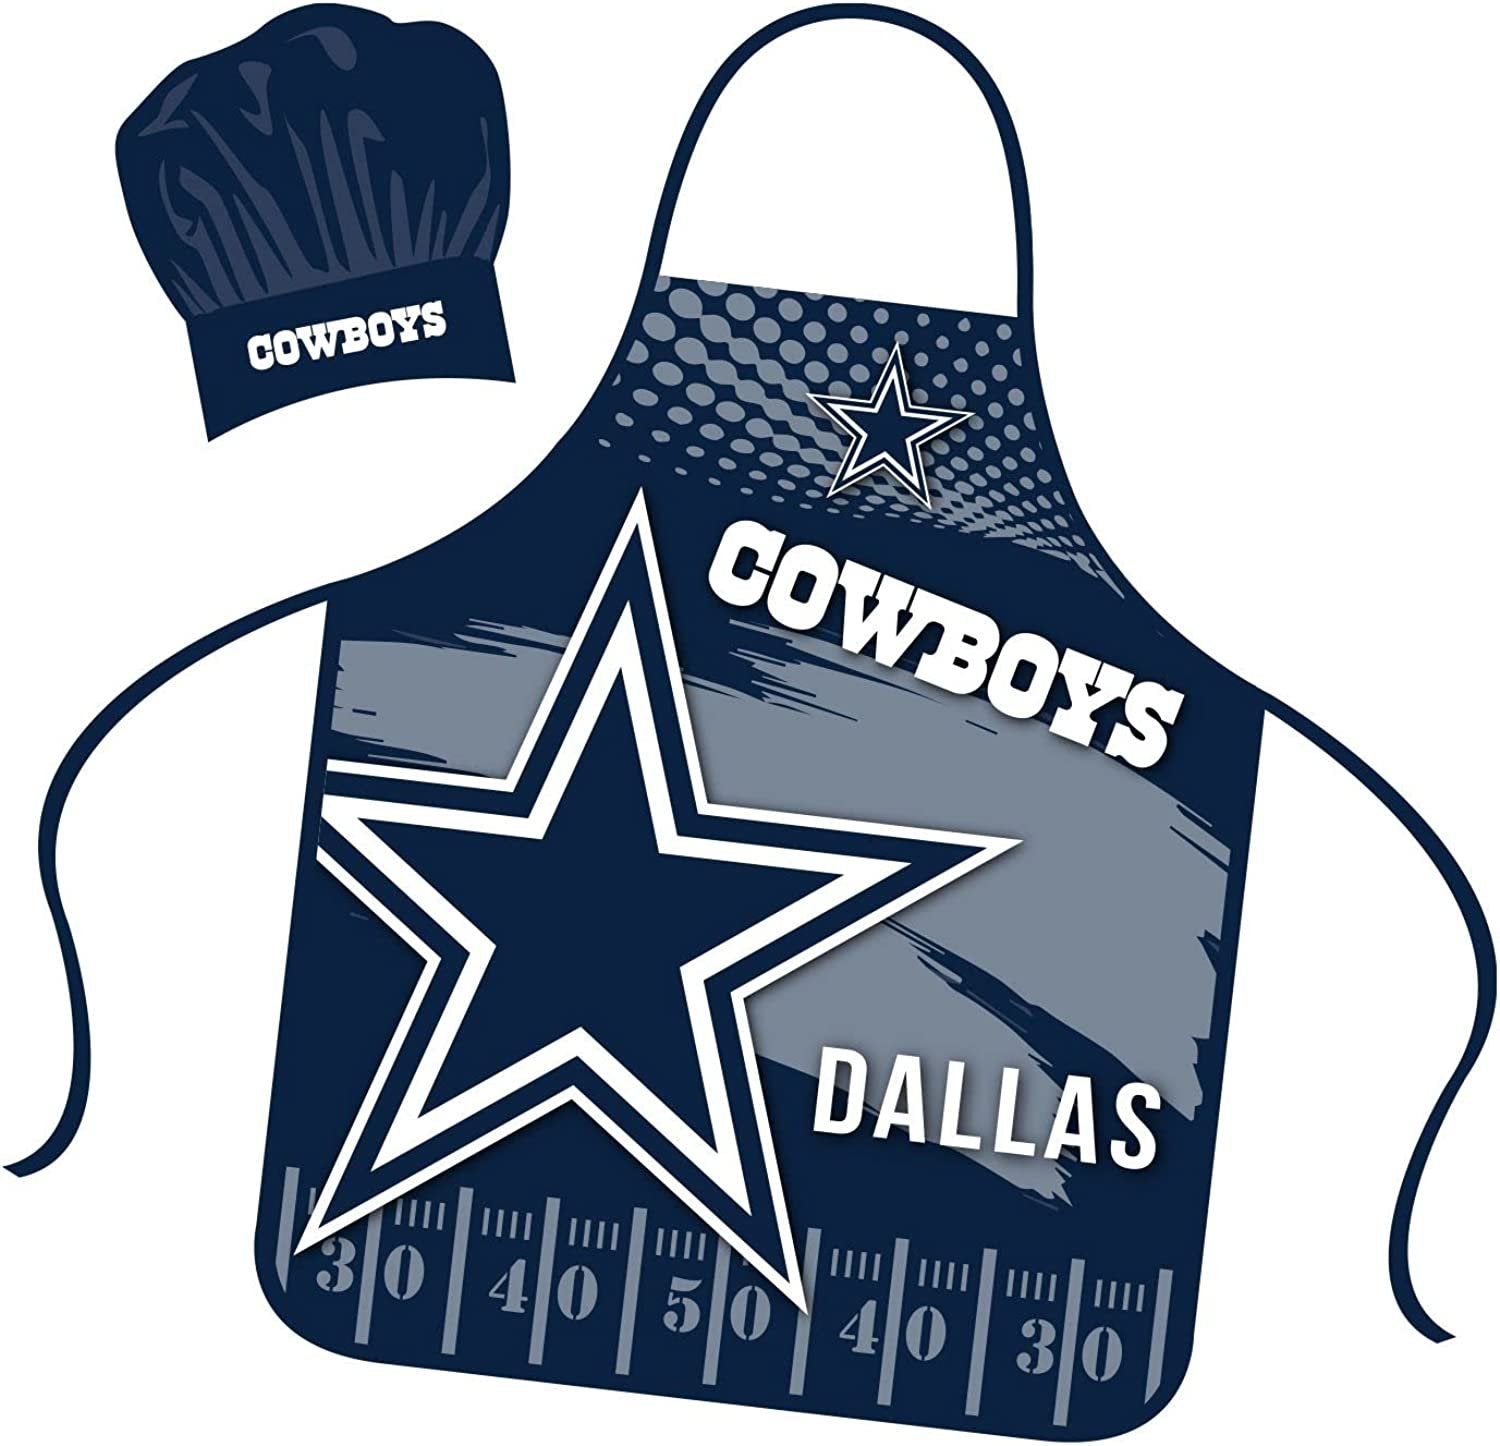 Dallas Cowboys Apron Chef Hat Set Full Color Universal Size Tie Back Grilling Tailgate BBQ Cooking Host